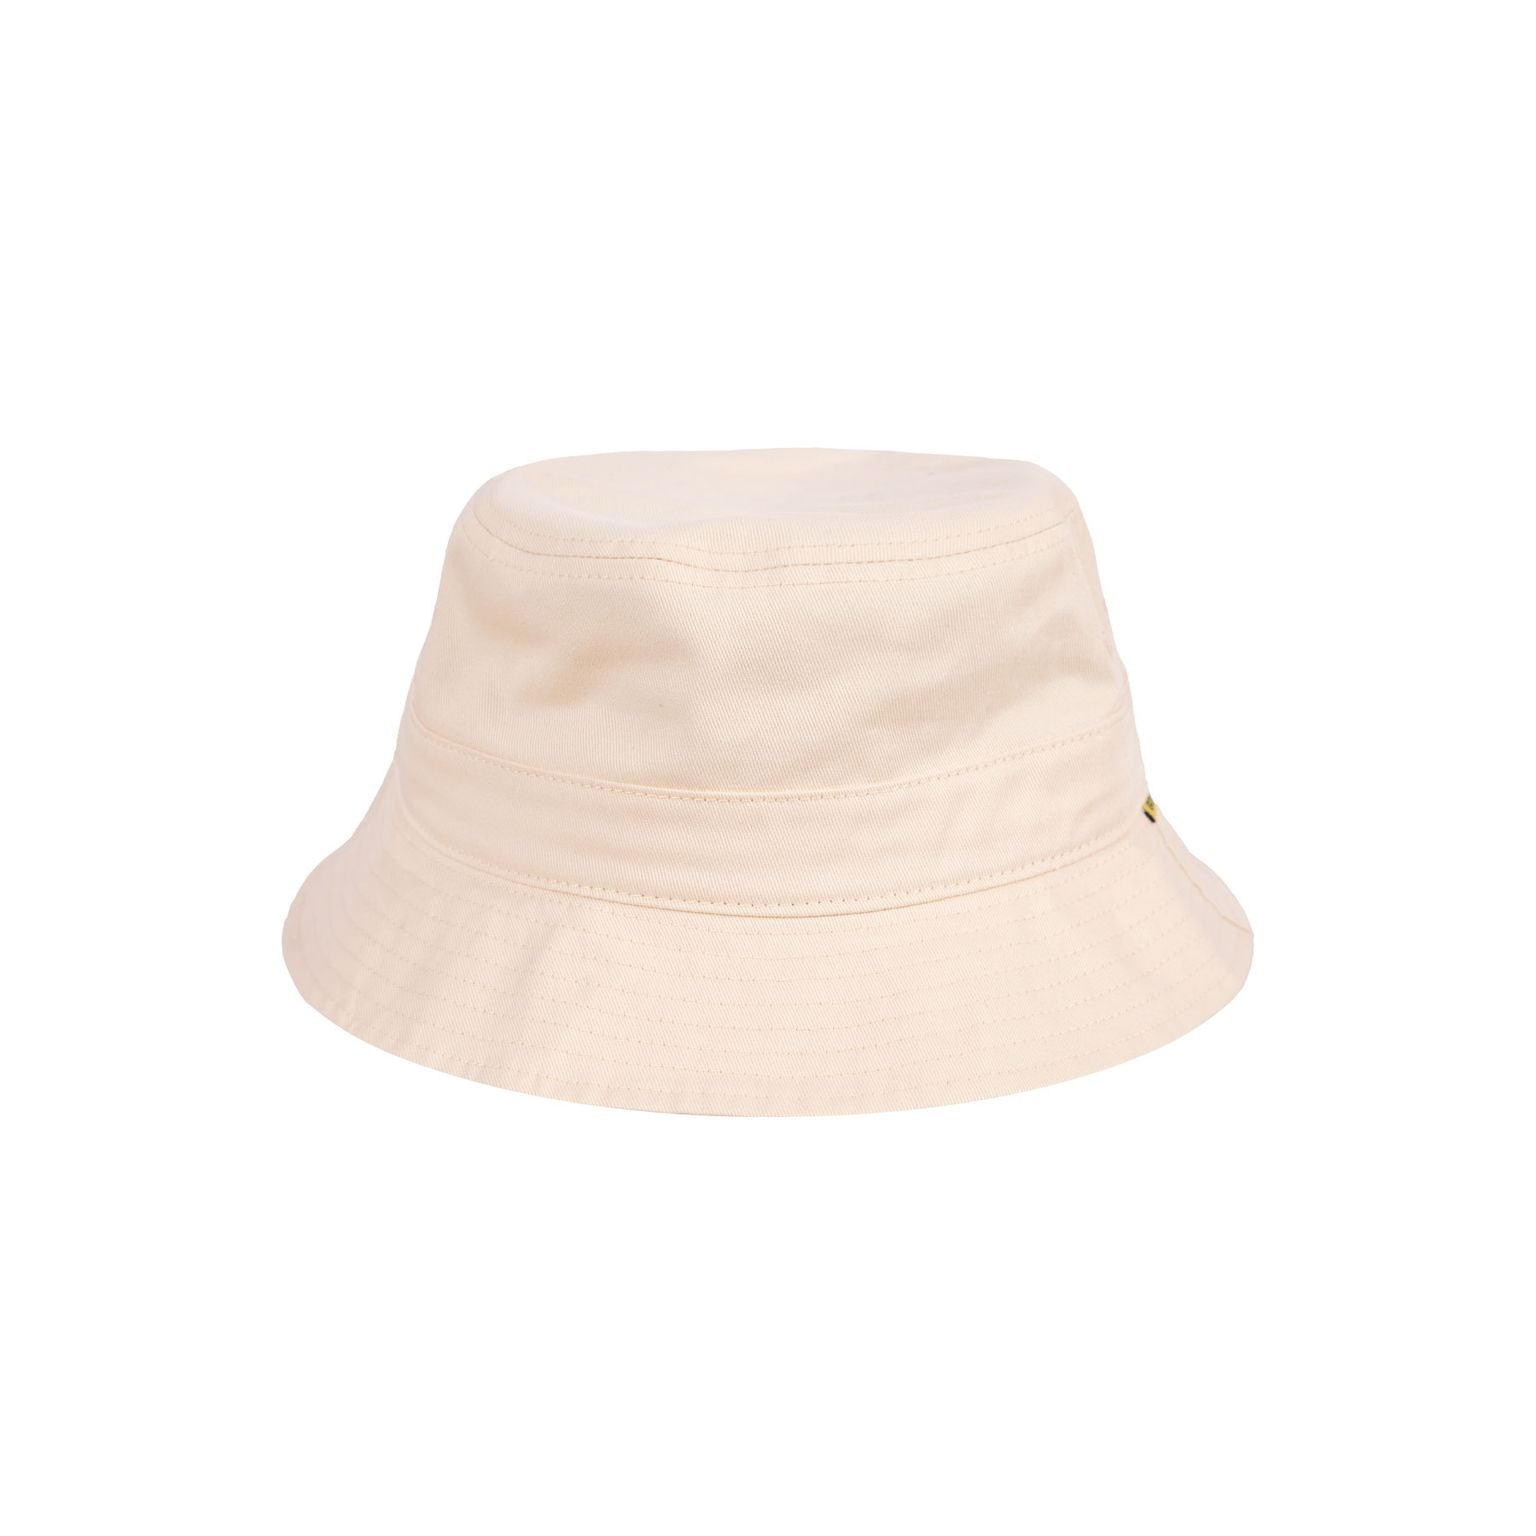 Adult Creamy Tan Color Blank Sherpa Bucket Hat. Perfect for Hat Patche –  Sublimation Blanks Company